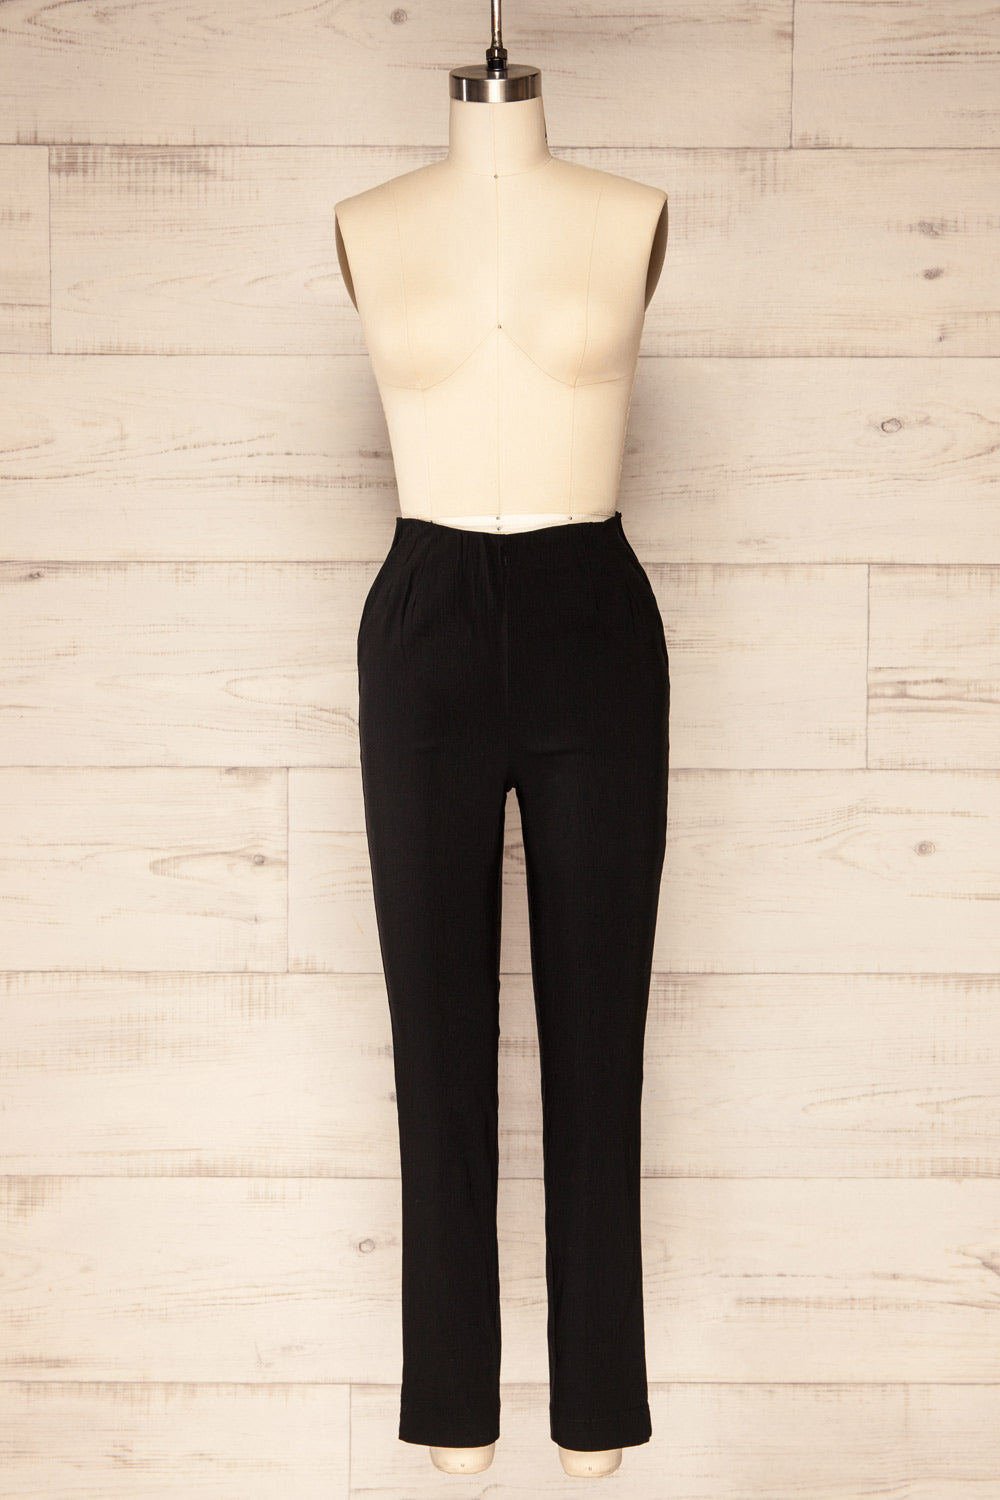 Orsova Black Fitted Pants w/ Stretchable Waist